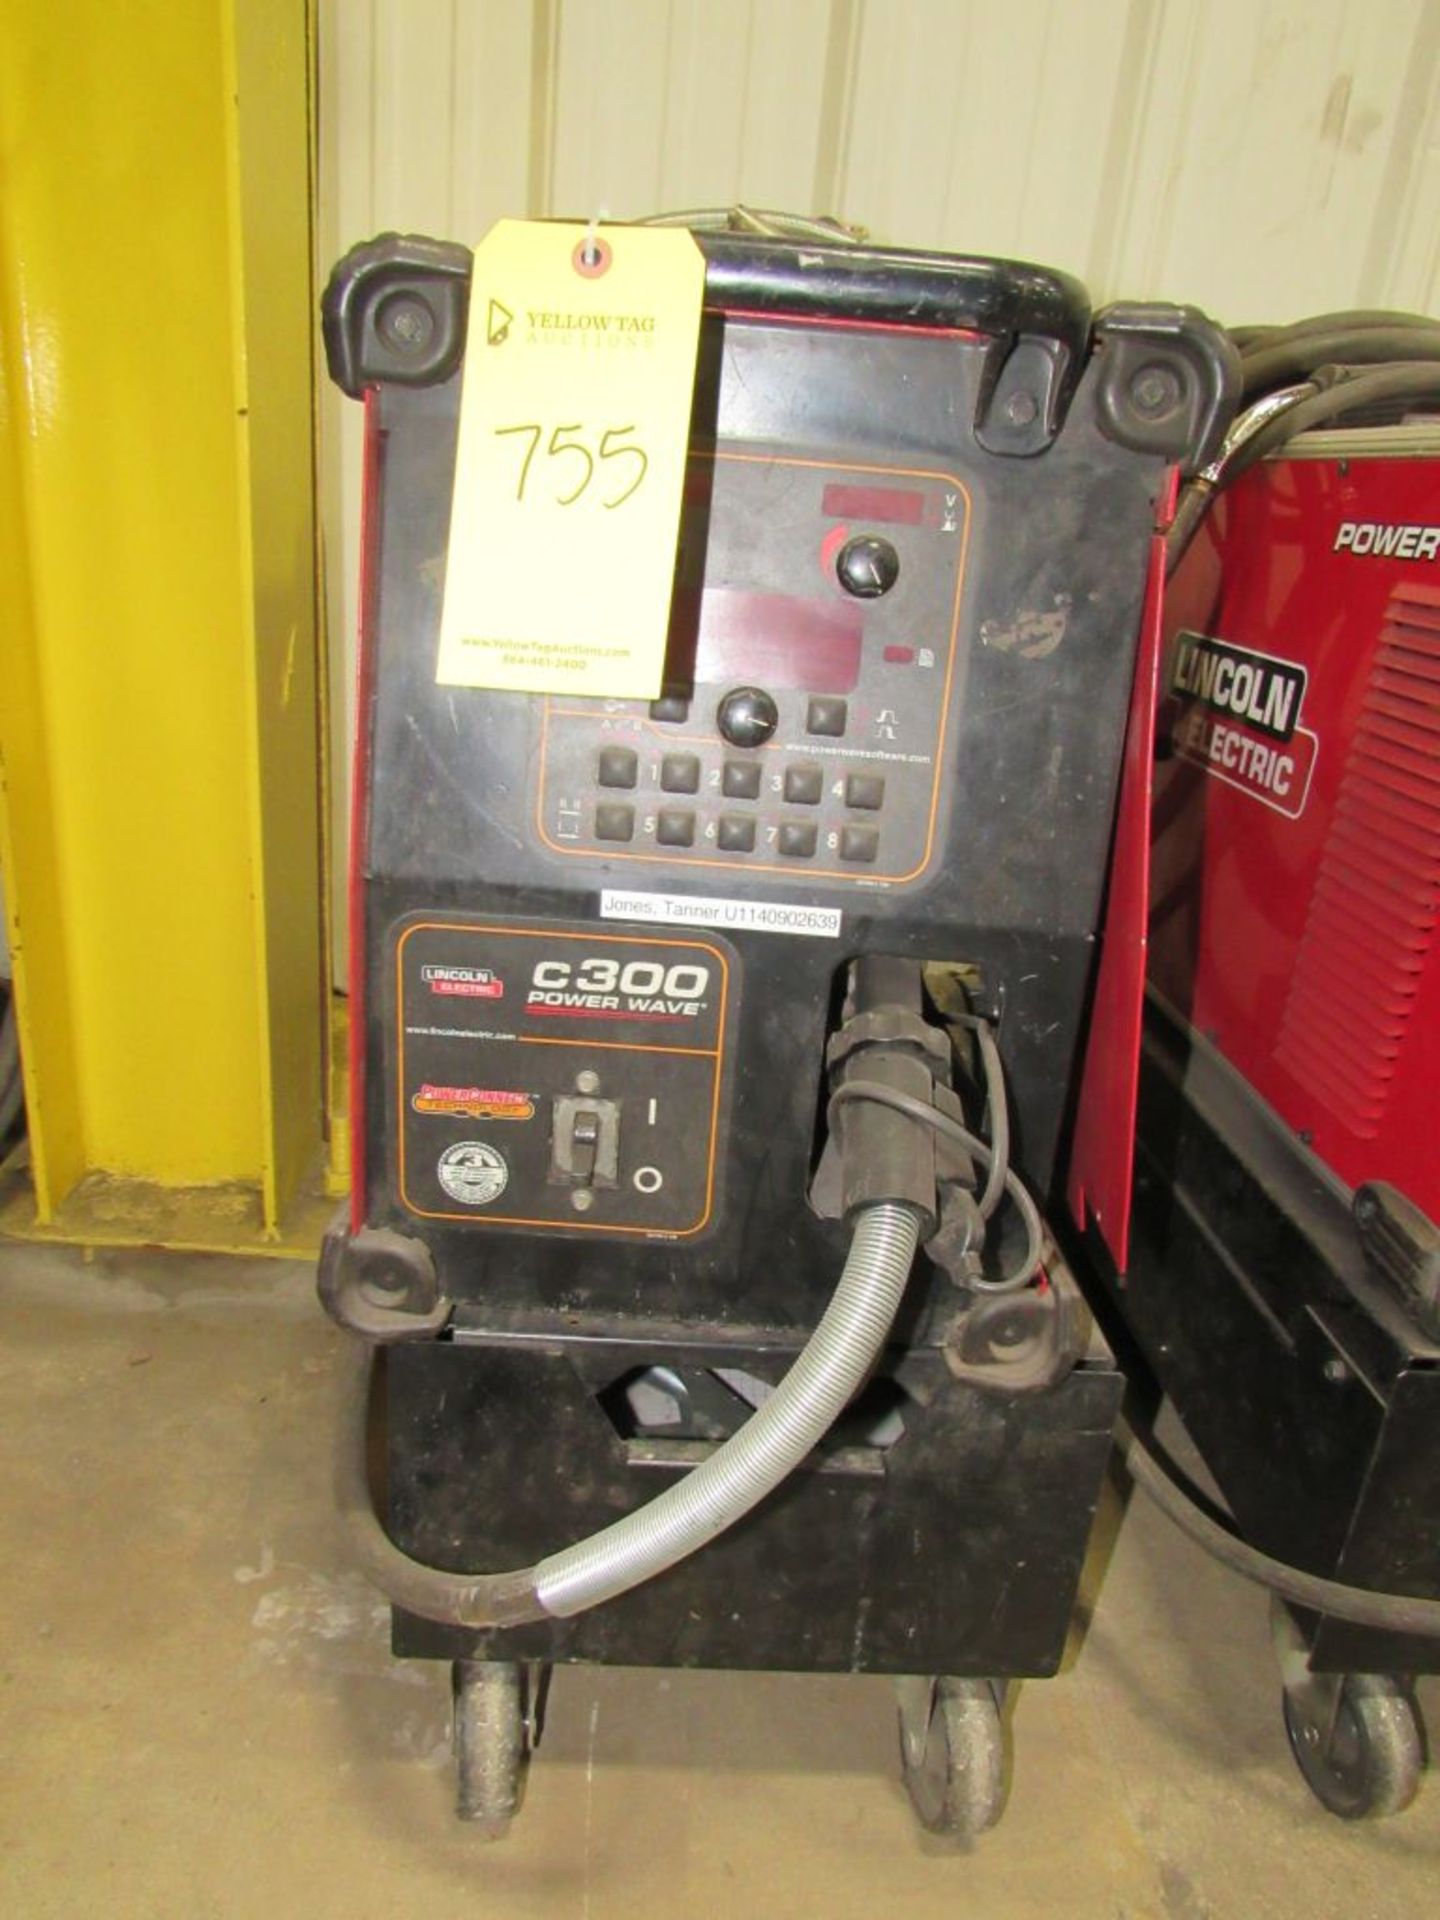 Lincoln C300 Power Wave Welder|Tag: 234755